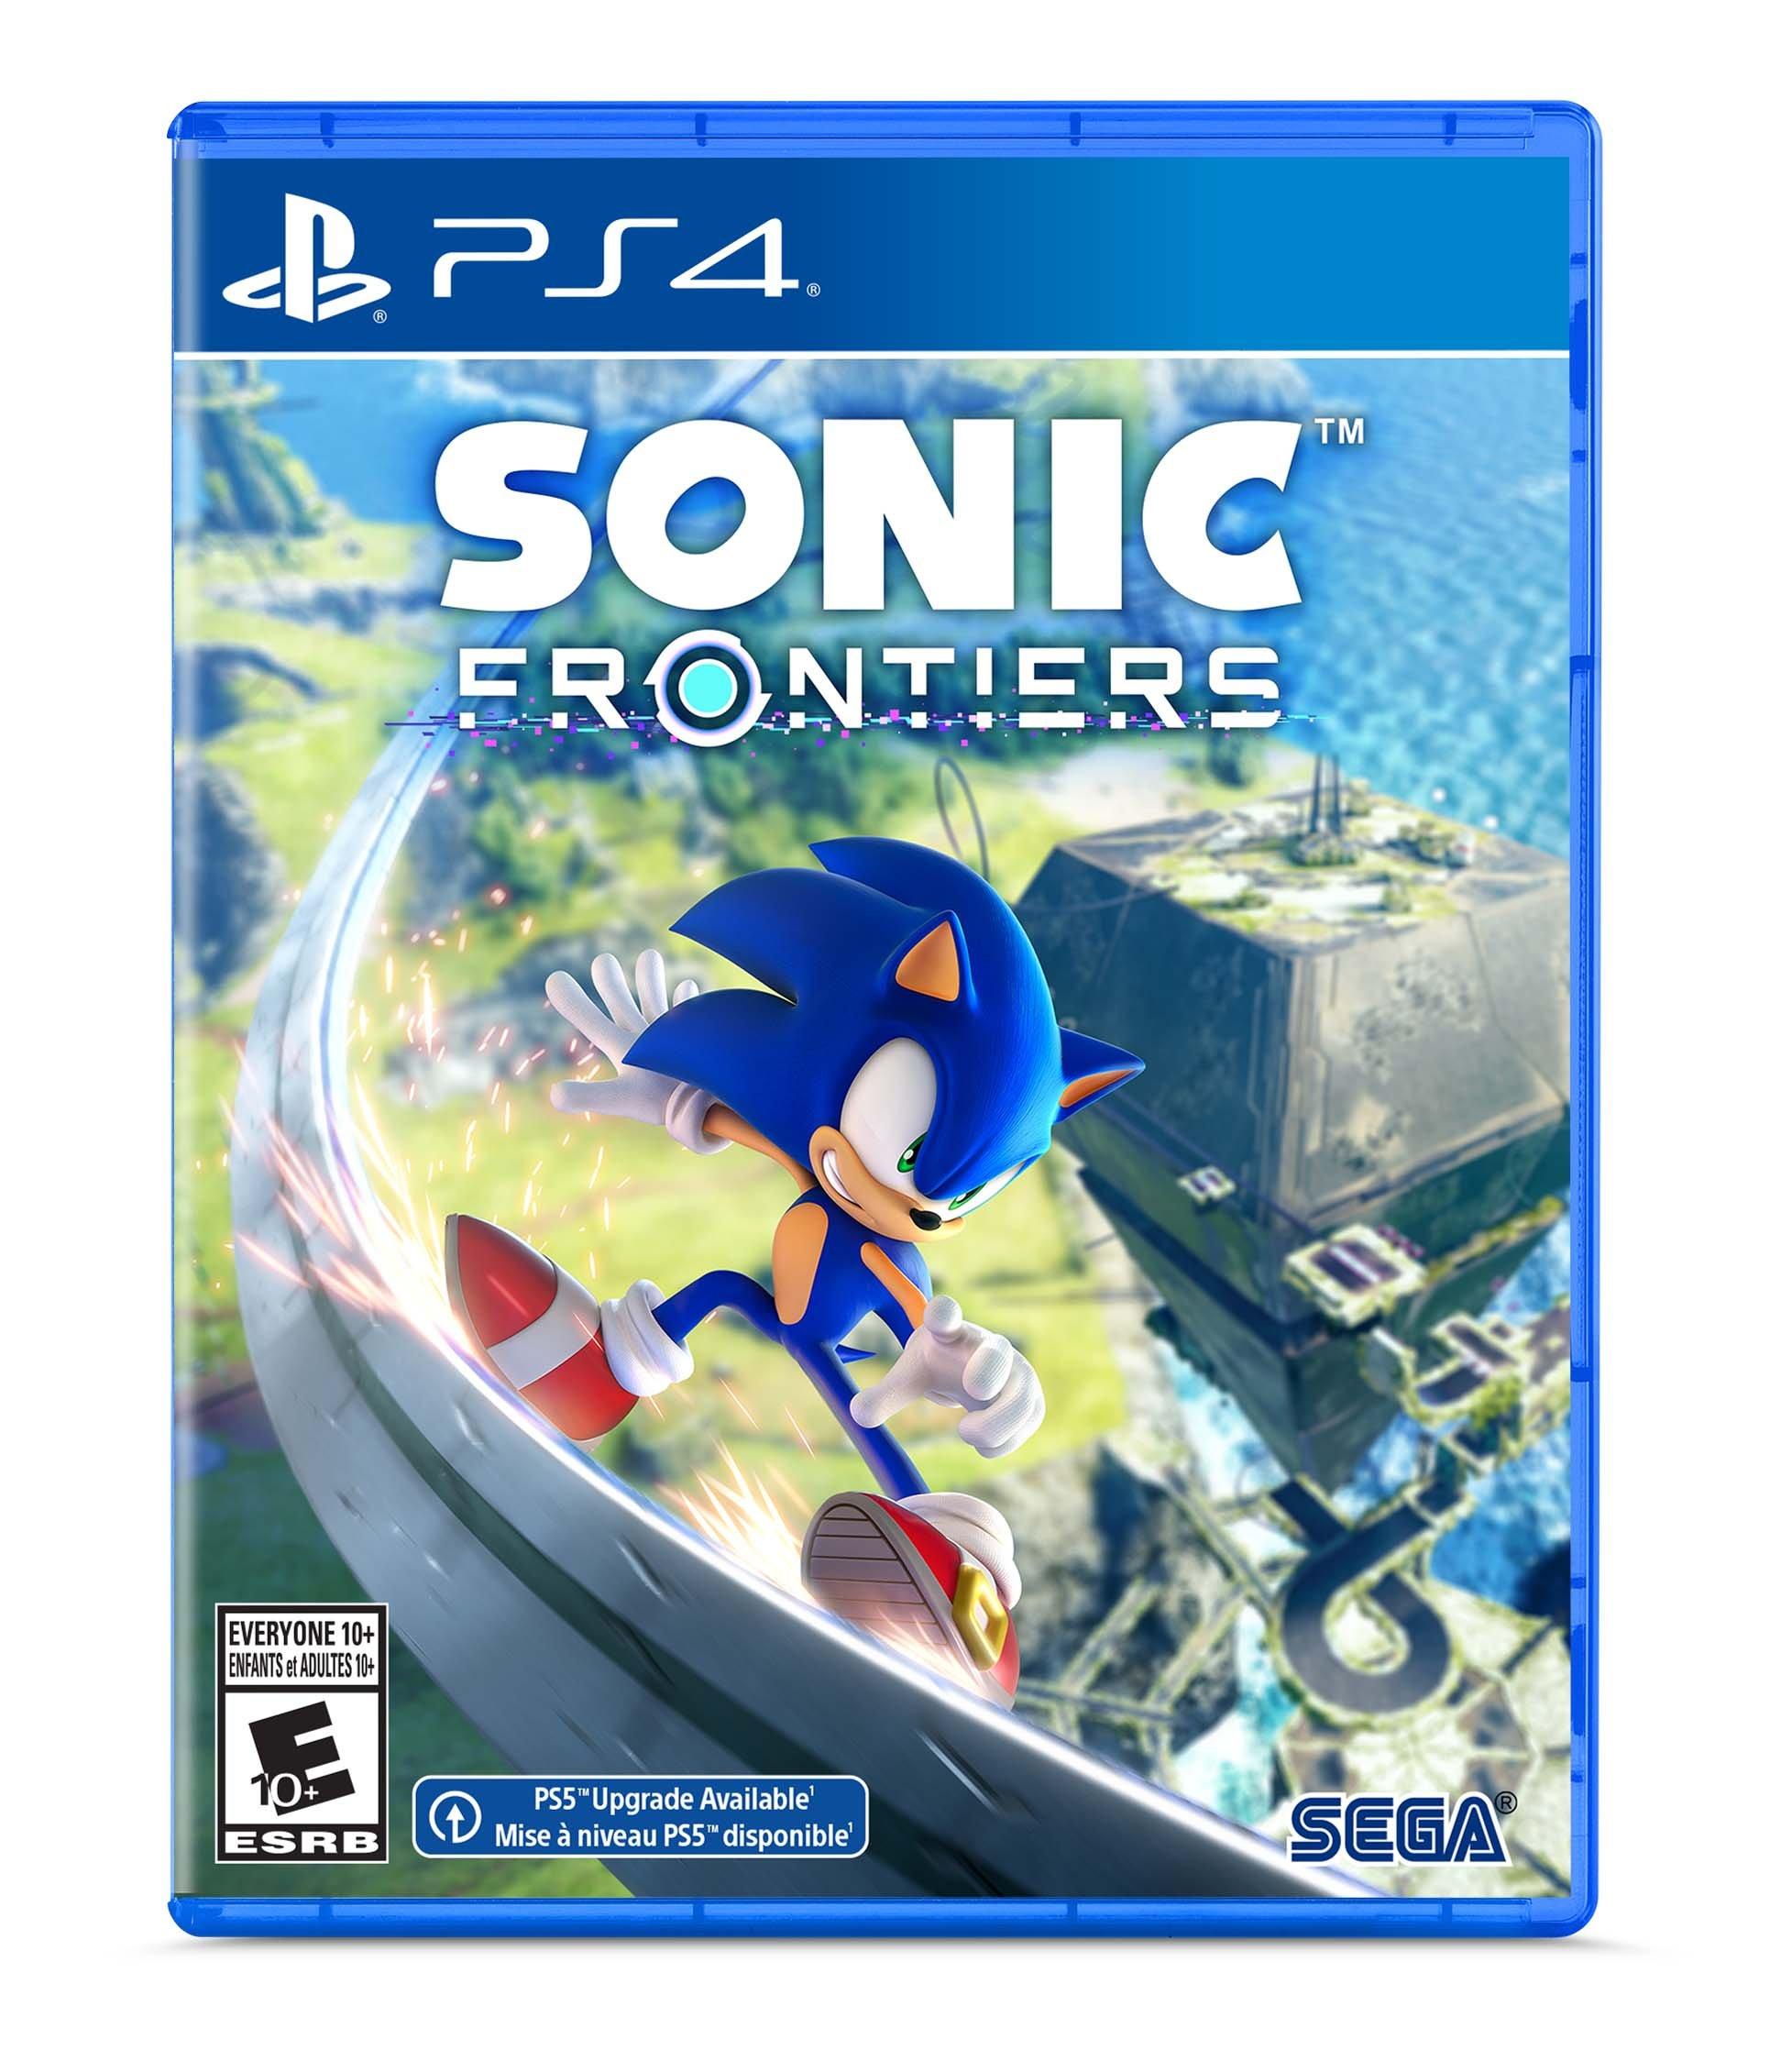 Sonic Superstars (PC) -  Exclusive (Xbox Series X / PS4 / PS5 /  Nintendo Switch)